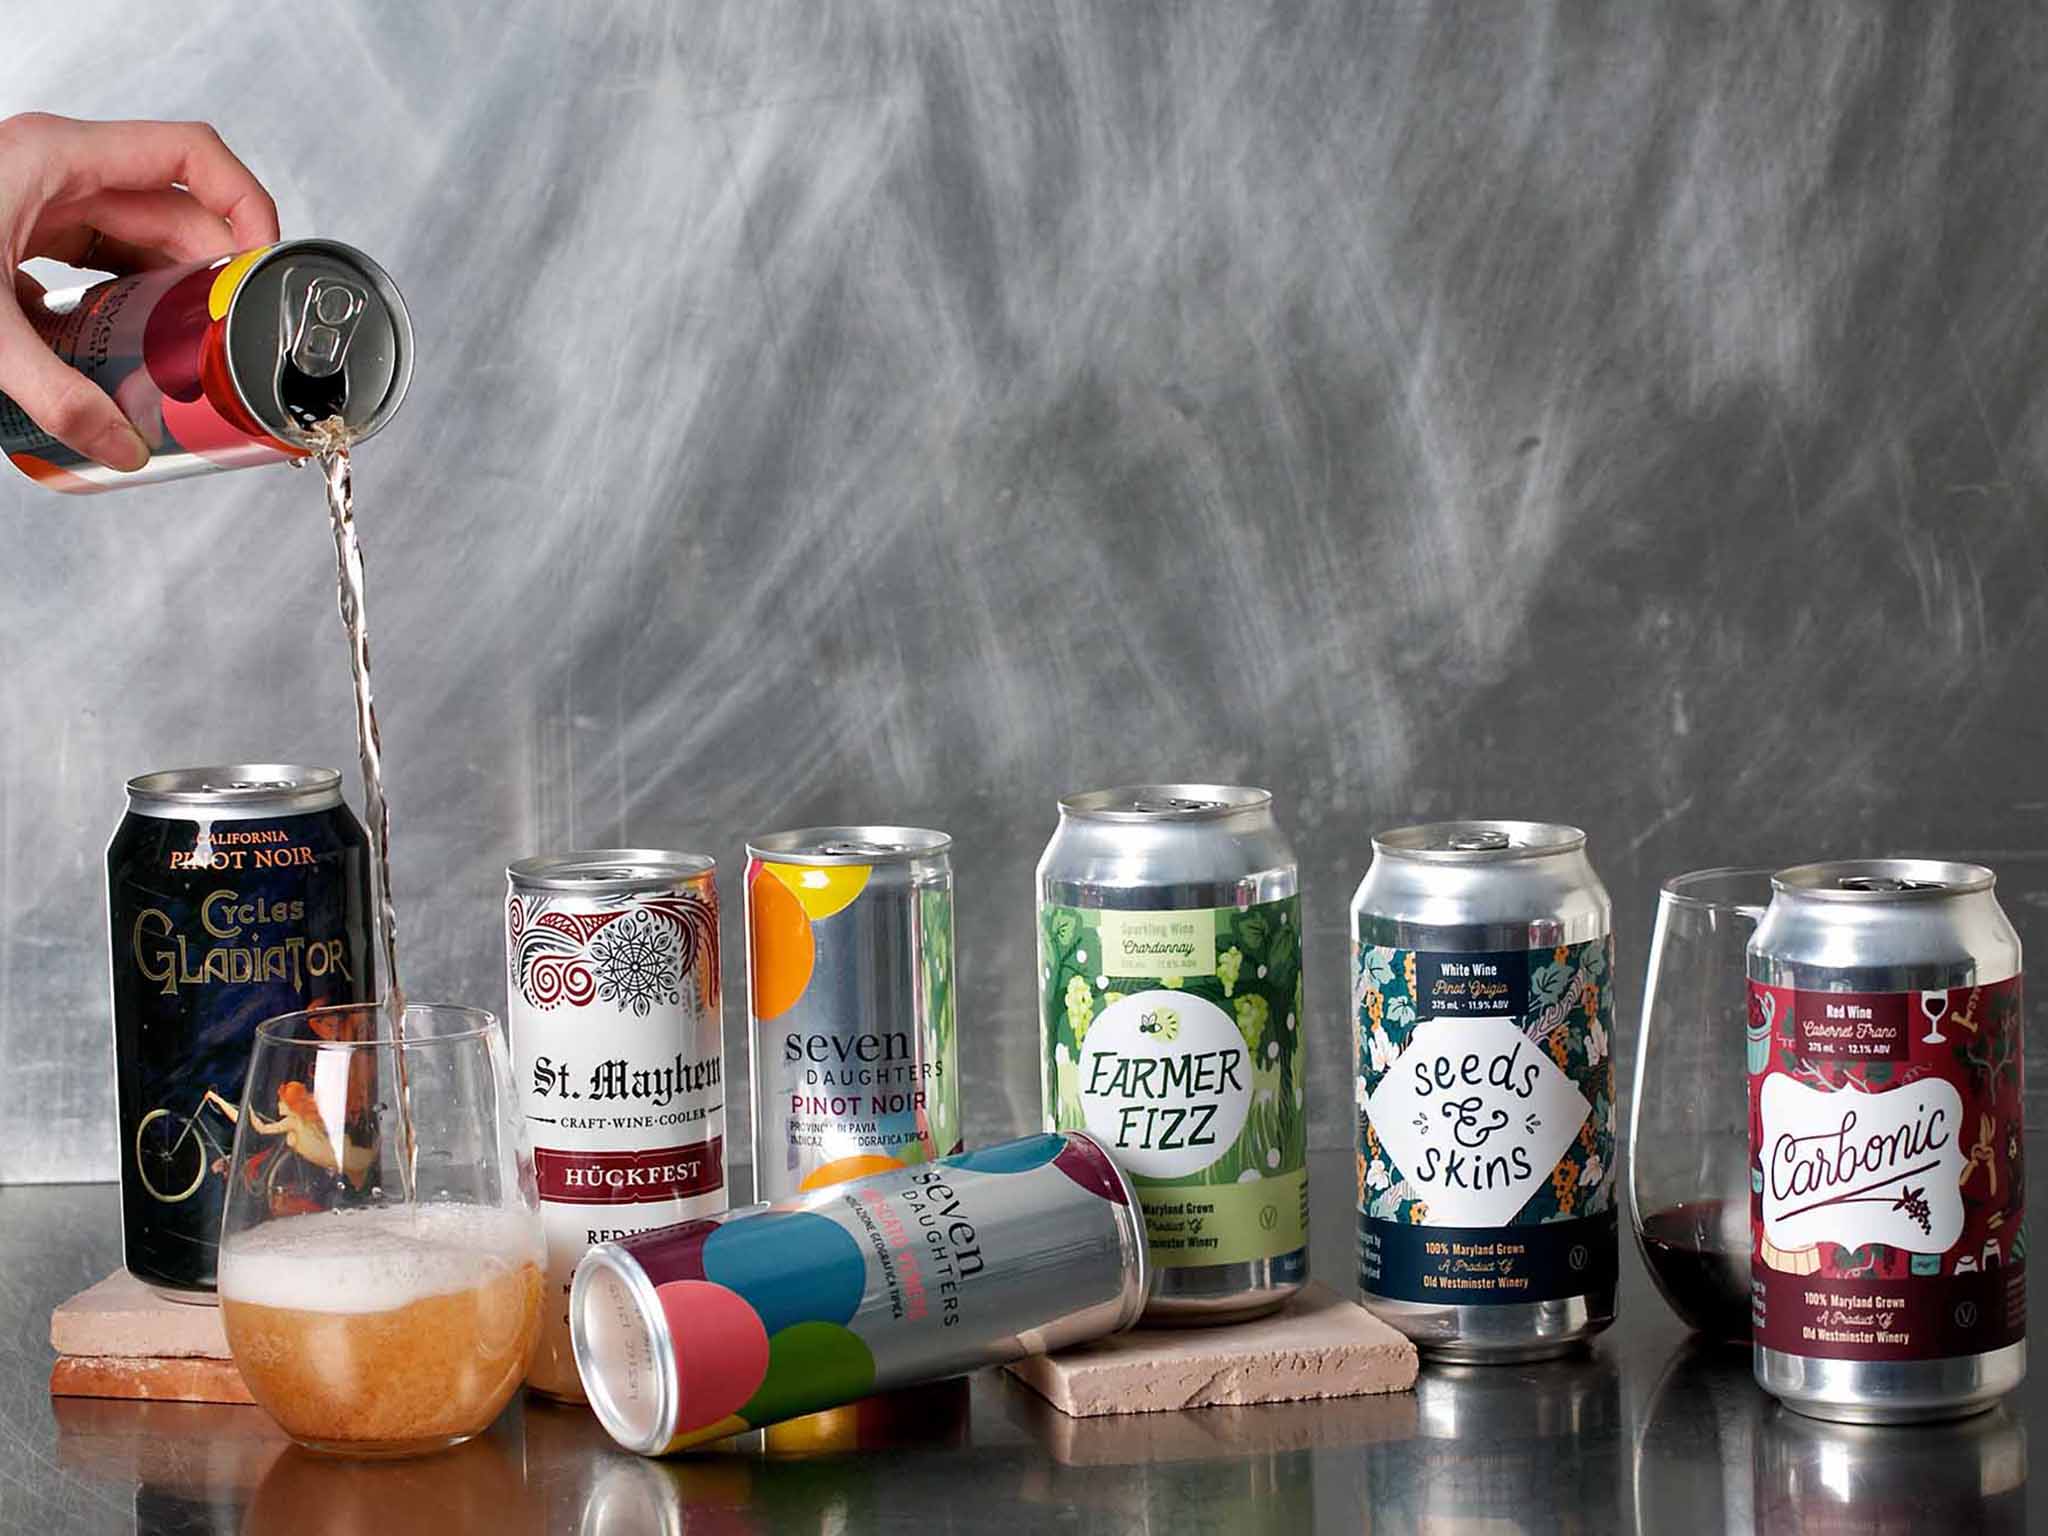 Sales of canned wine have exploded in the past few years